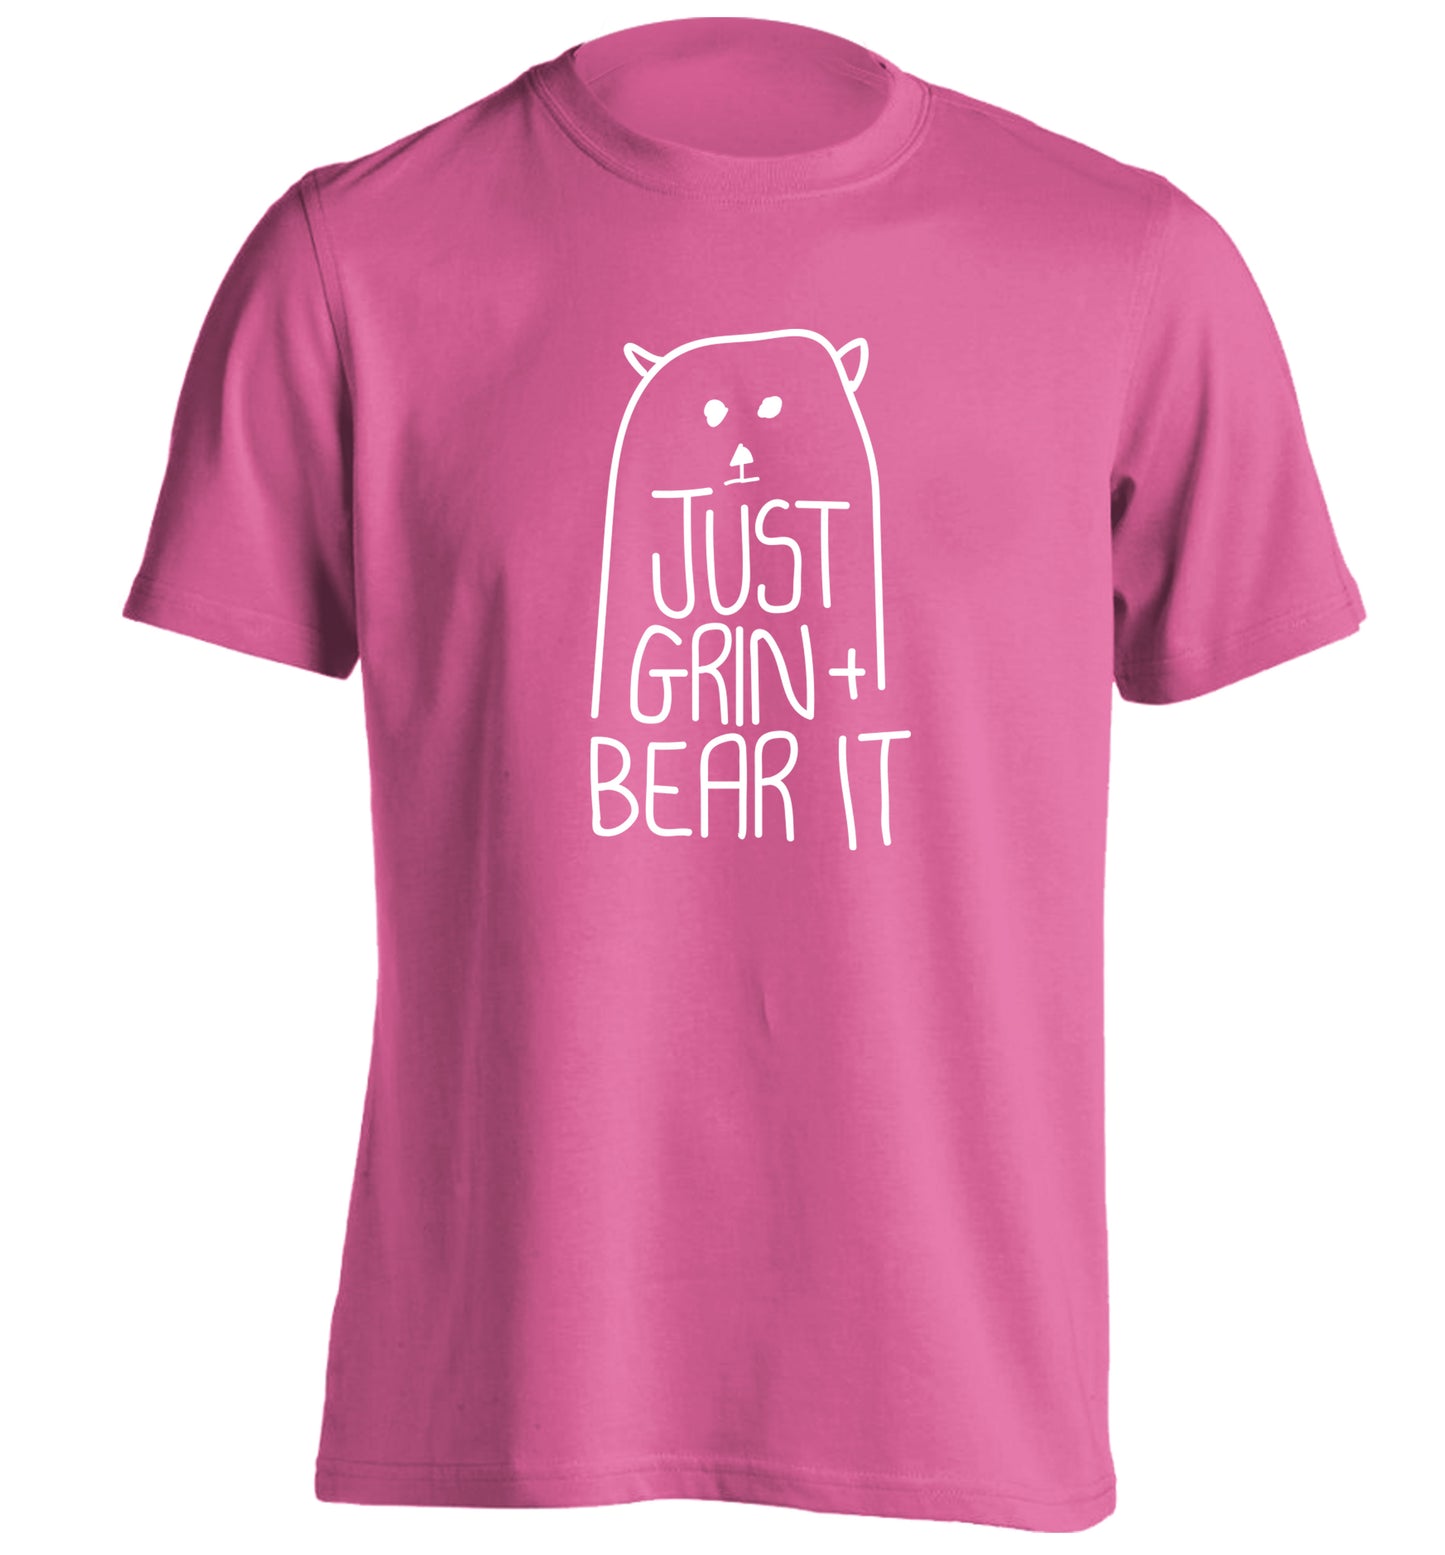 Just grin and bear it adults unisex pink Tshirt 2XL